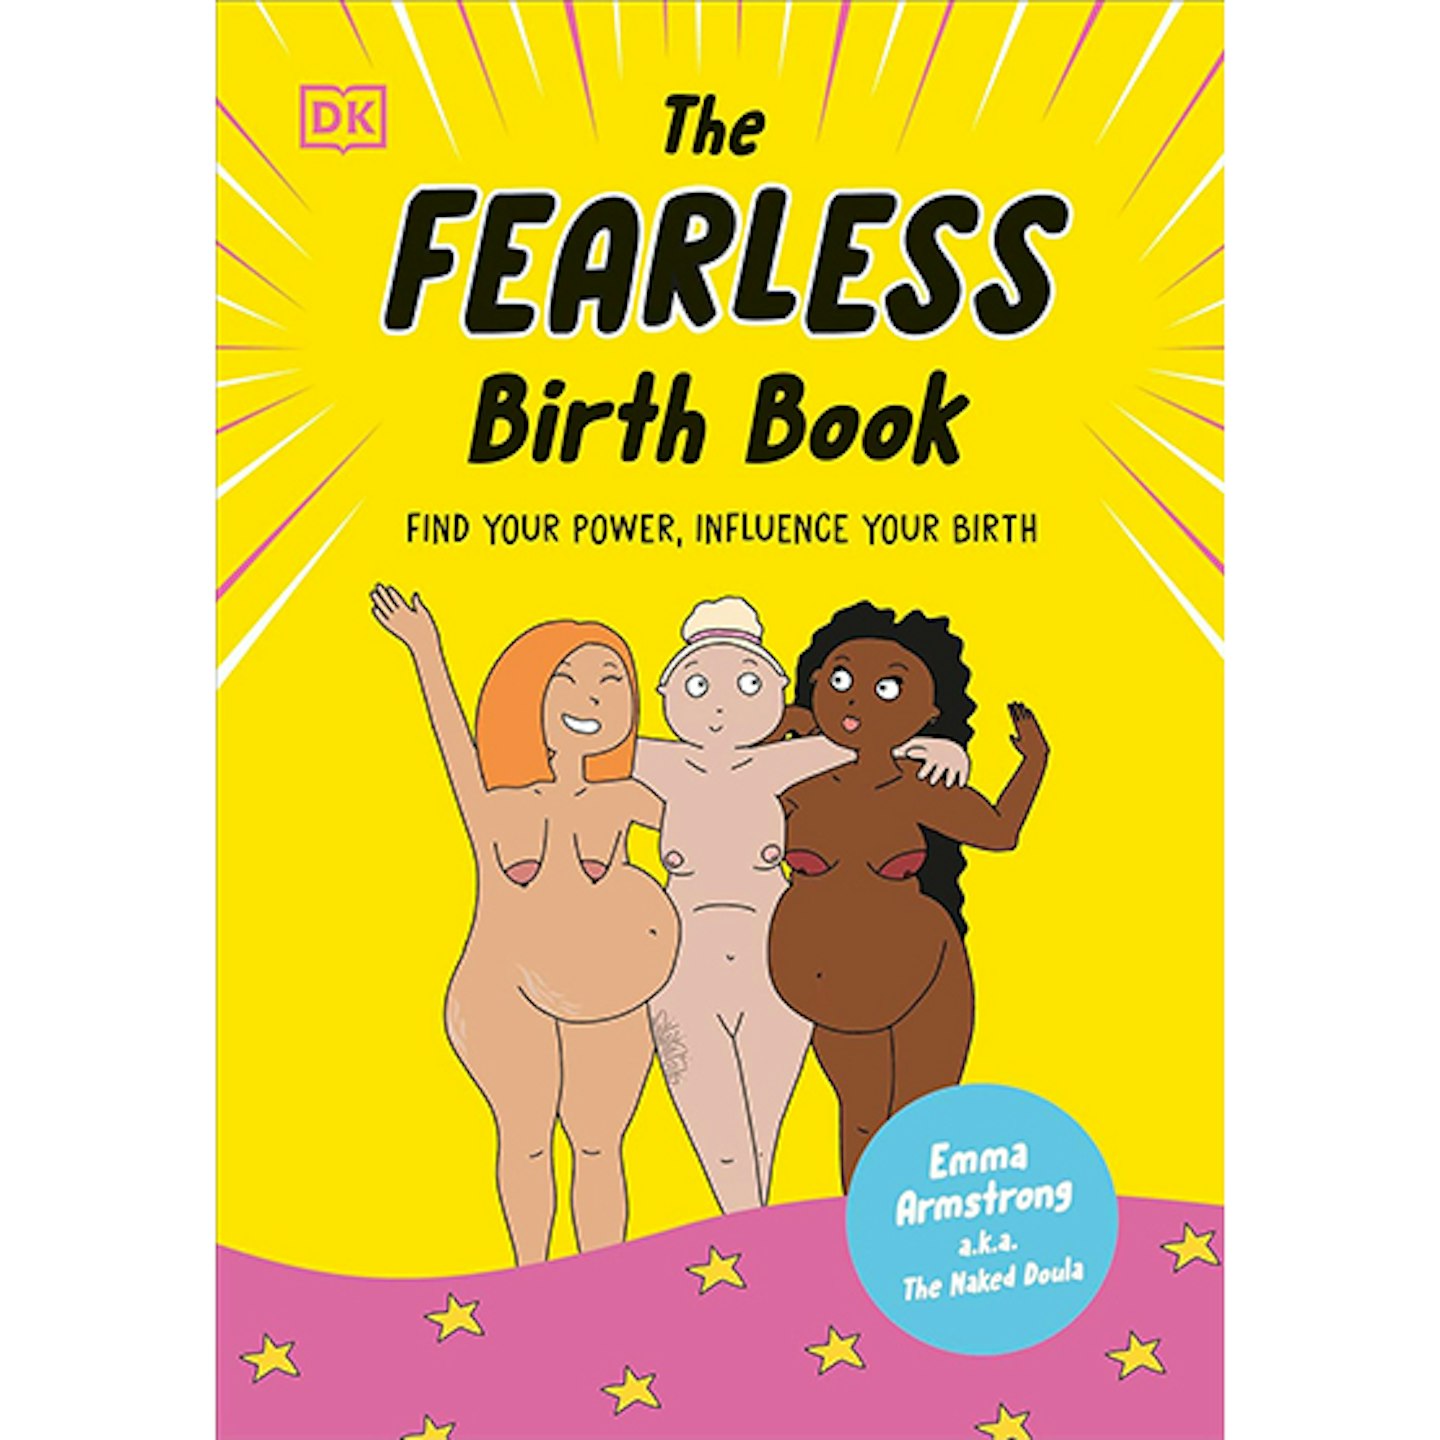 The Fearless Birth Book, Naked Doula